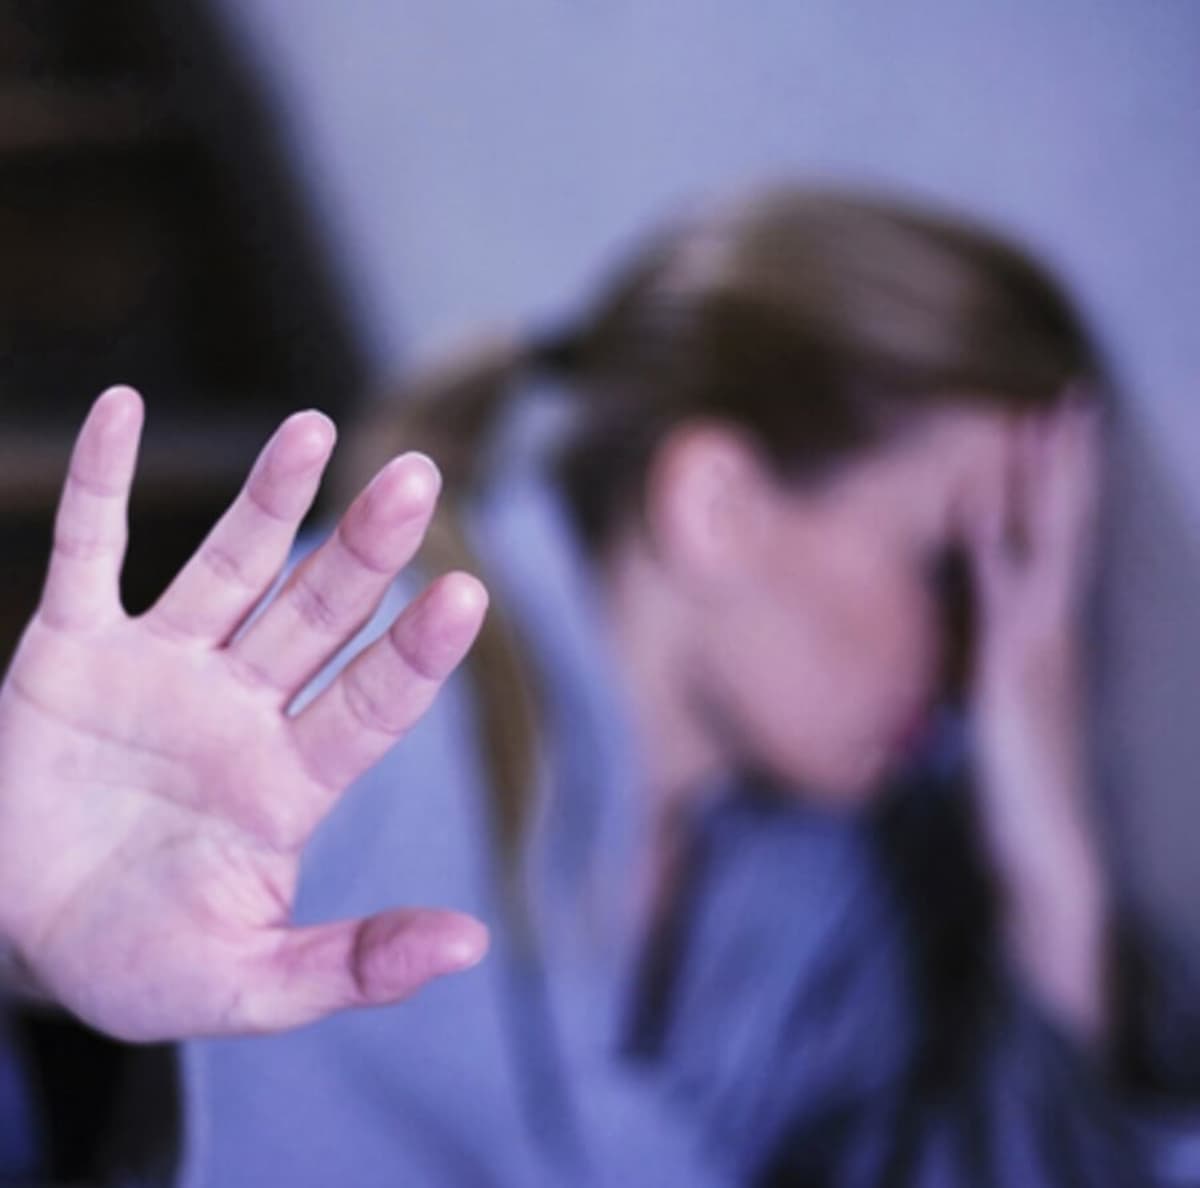 Emotional Abuse: Relationship Therapy to Stop the Abuse